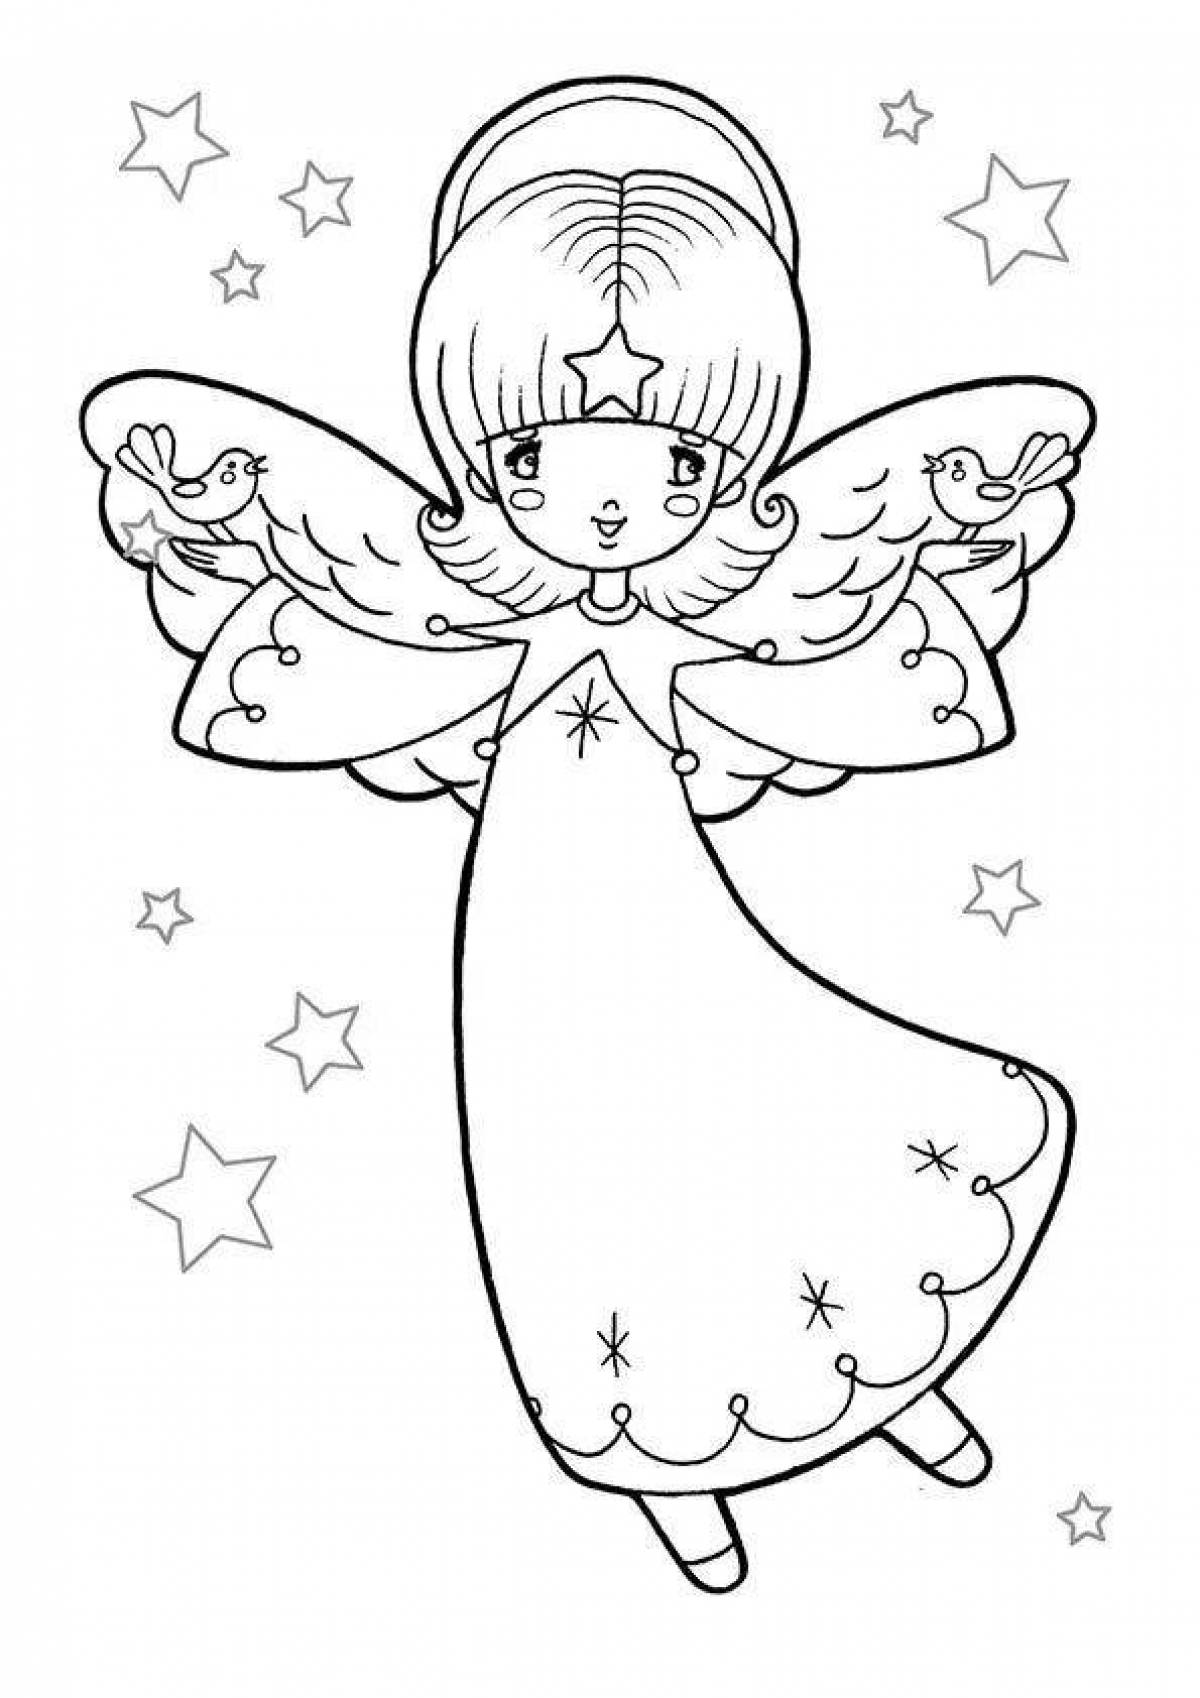 Wonderful Christmas angel coloring book for kids